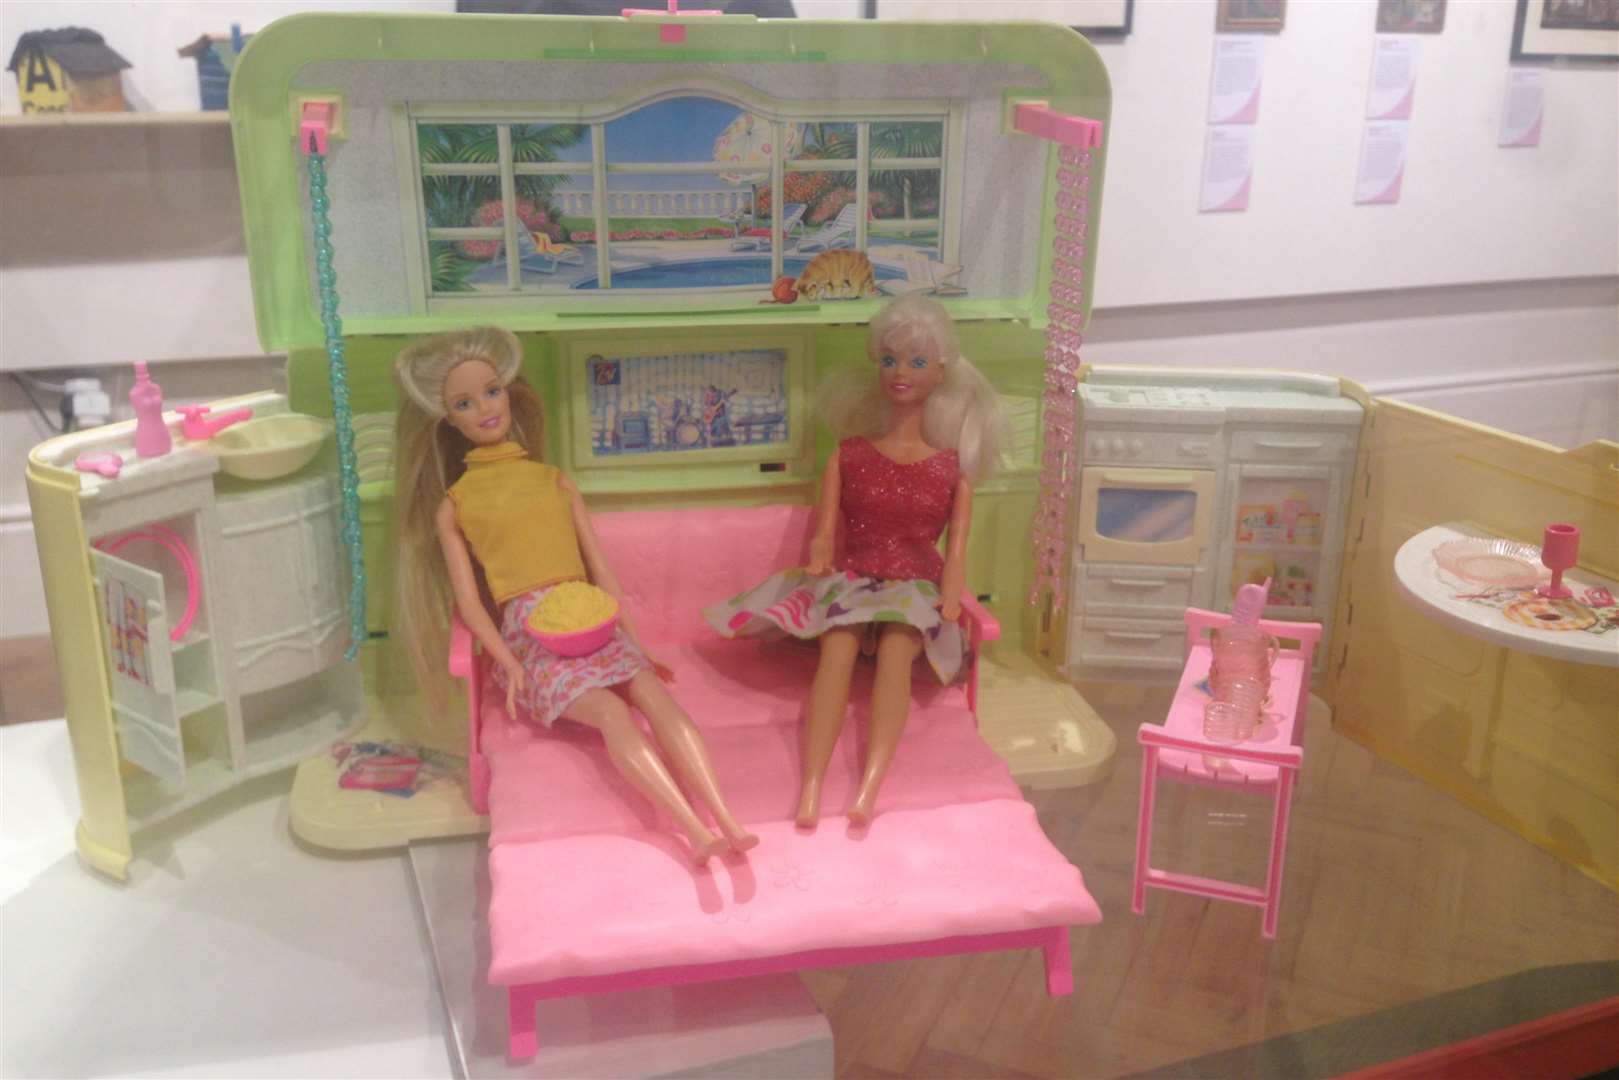 Barbie and friend relax